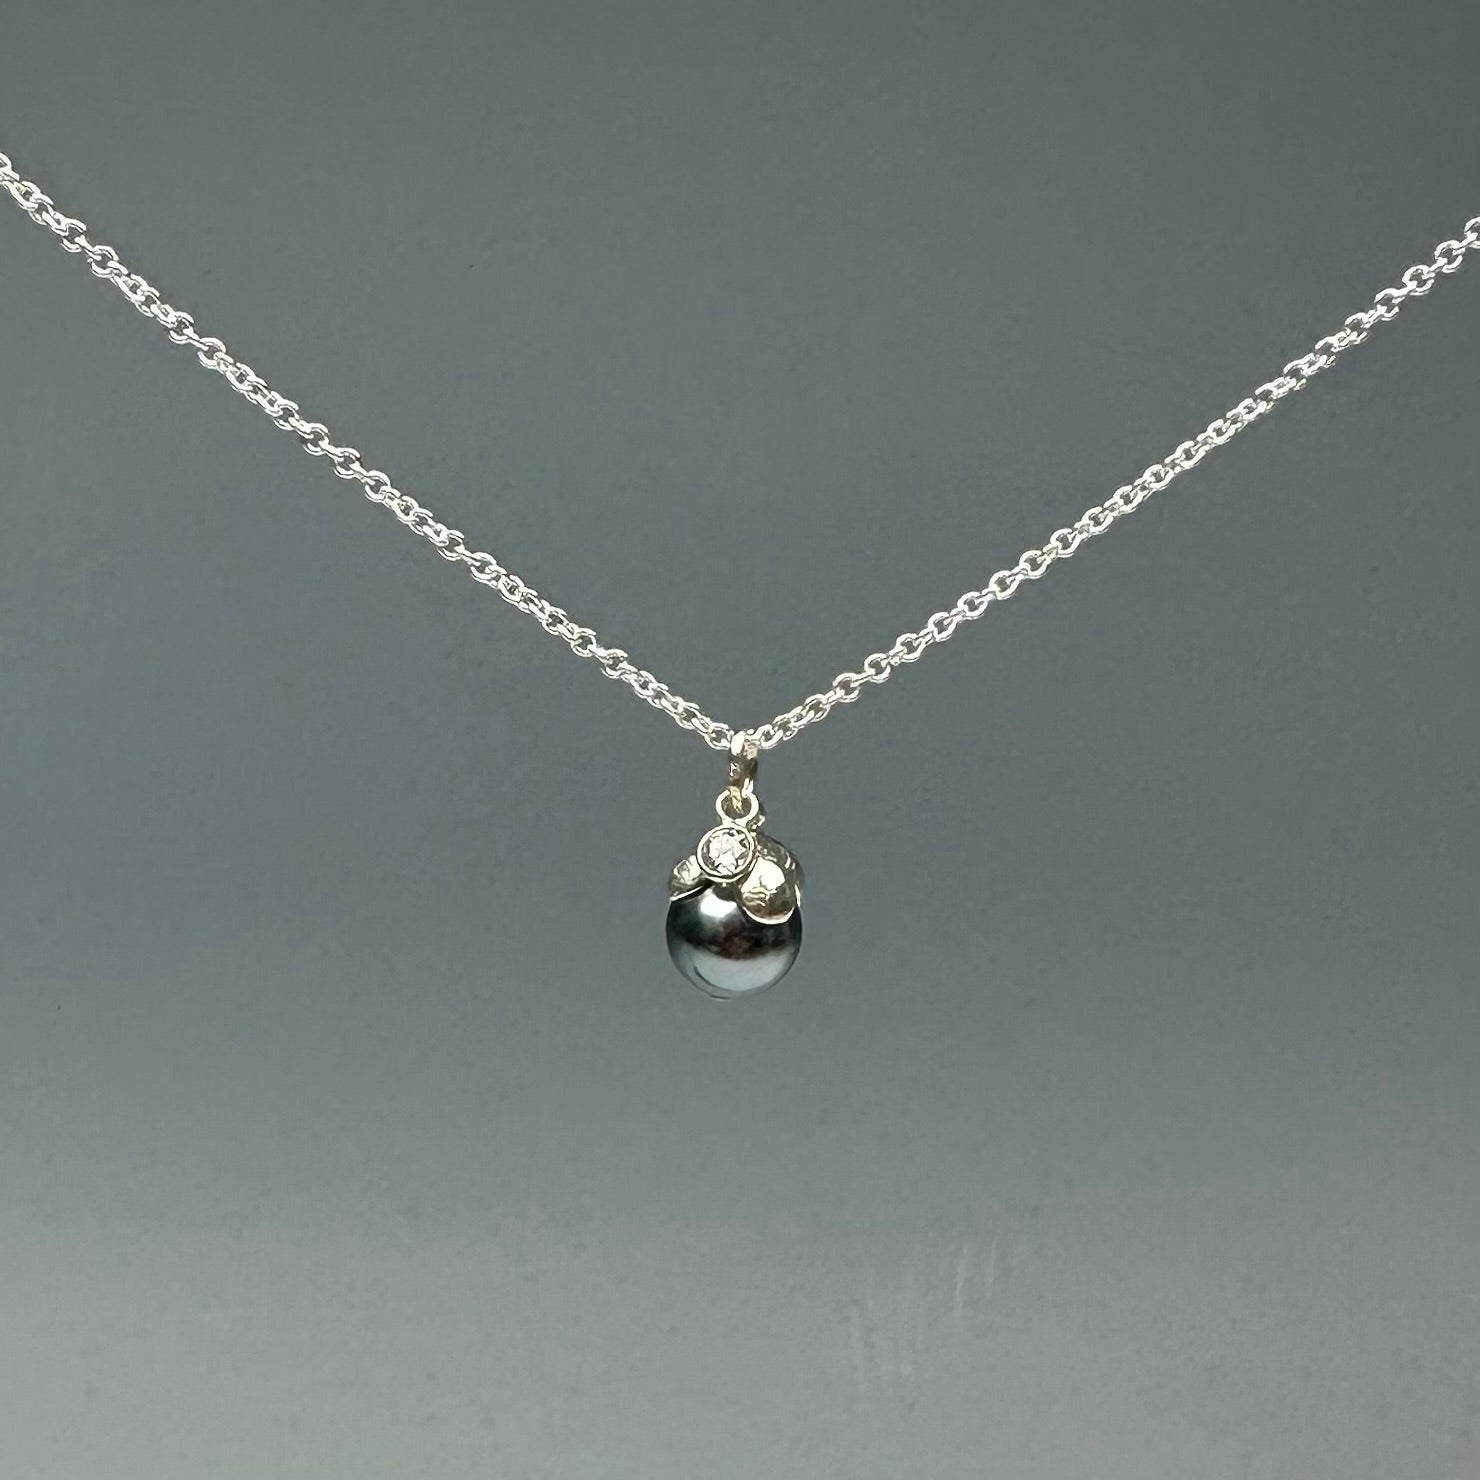 Berry Bloom Necklace in Silver and Gray Pearl - Heart of the Home LV